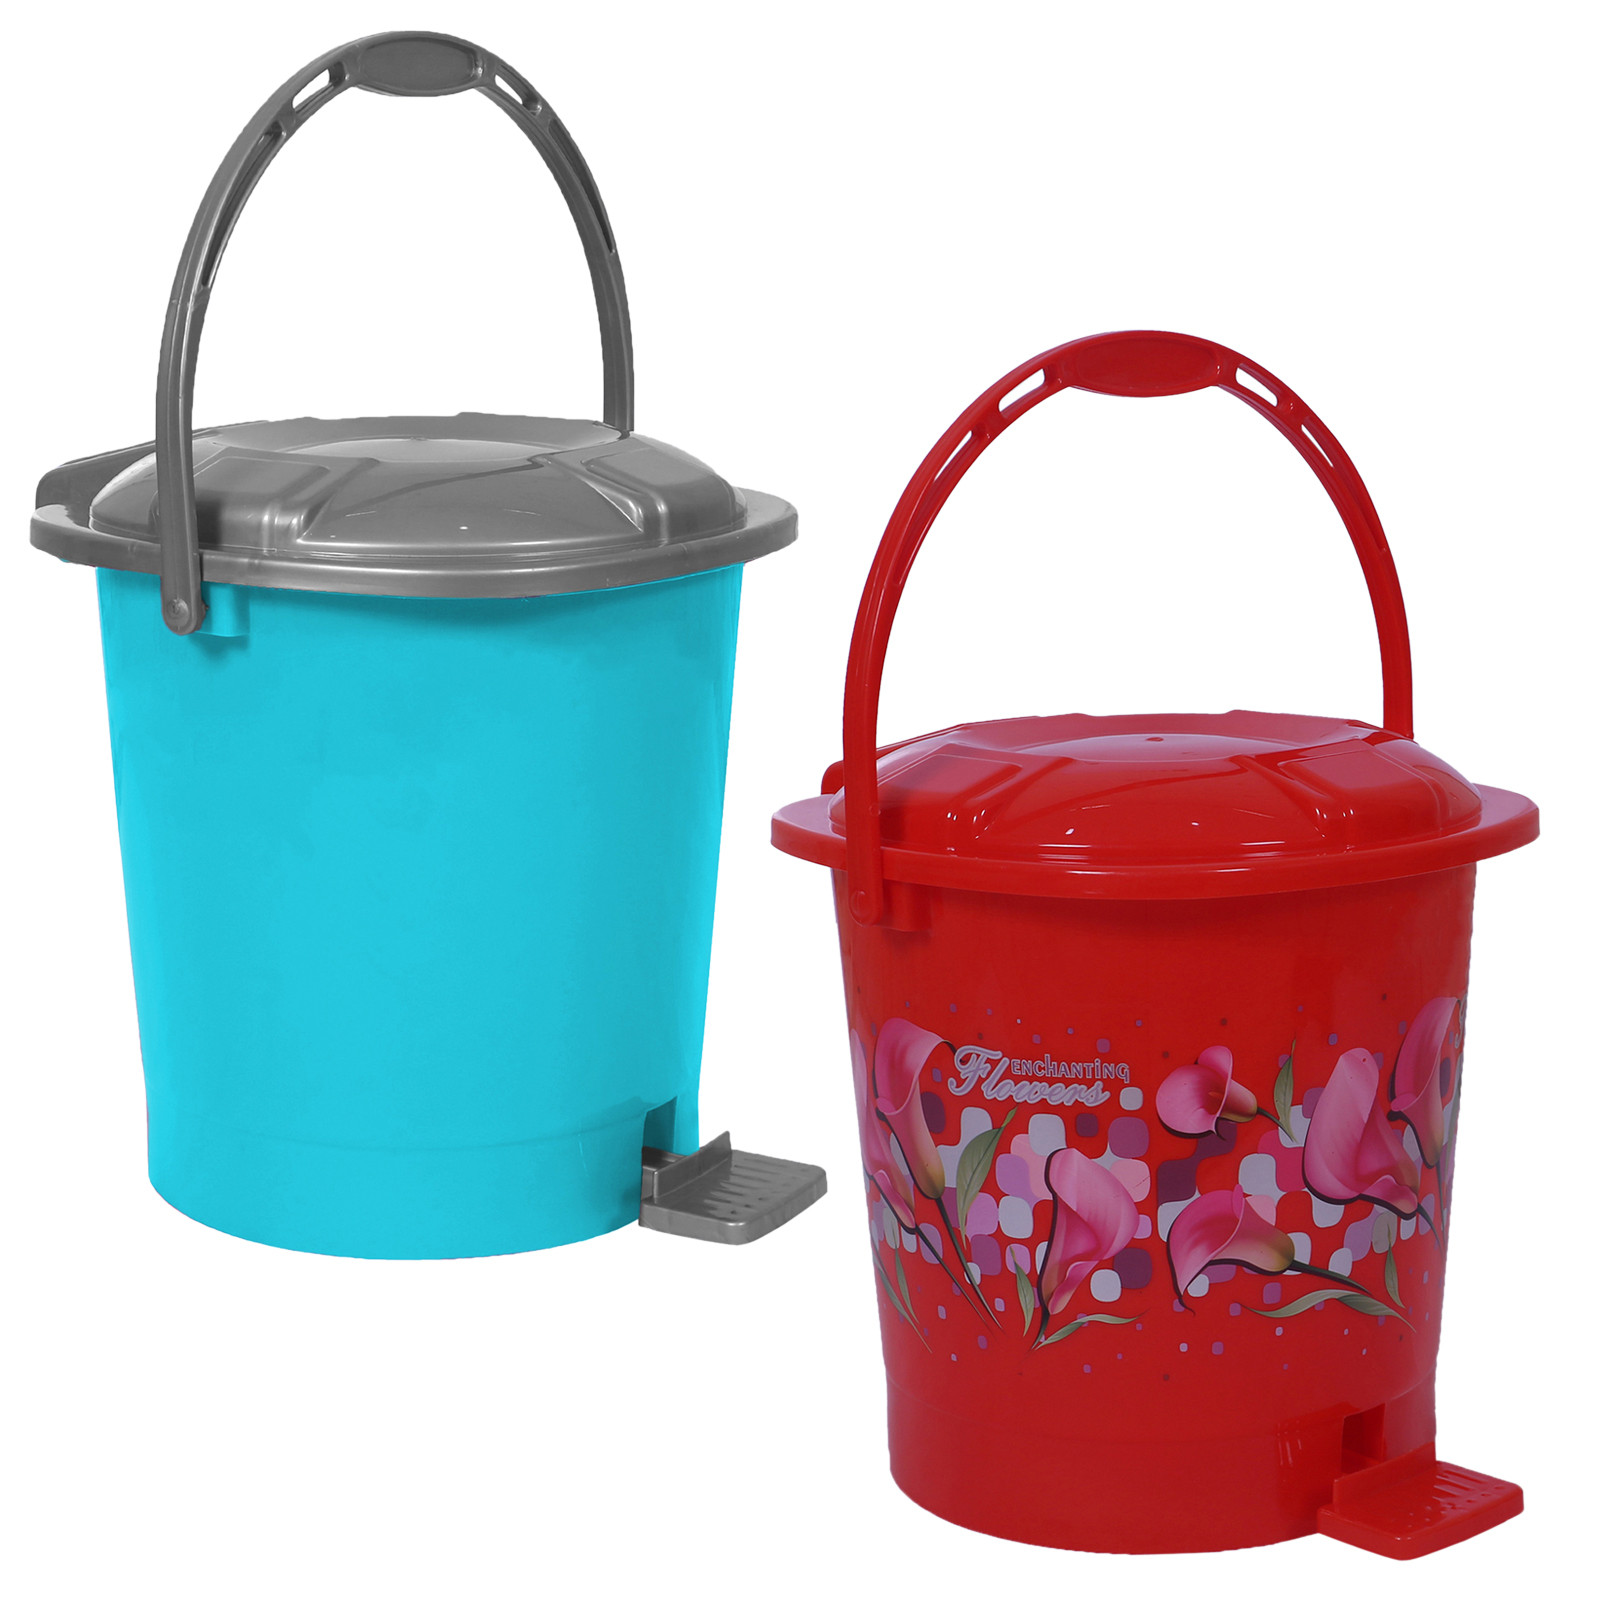 Kuber Industries Durable Plastic Pedal Dustbin|Waste Bin|Trash Can For Kitchen & Home With Handle,7 Litre,Pack of 2 (Sky Blue & Red)